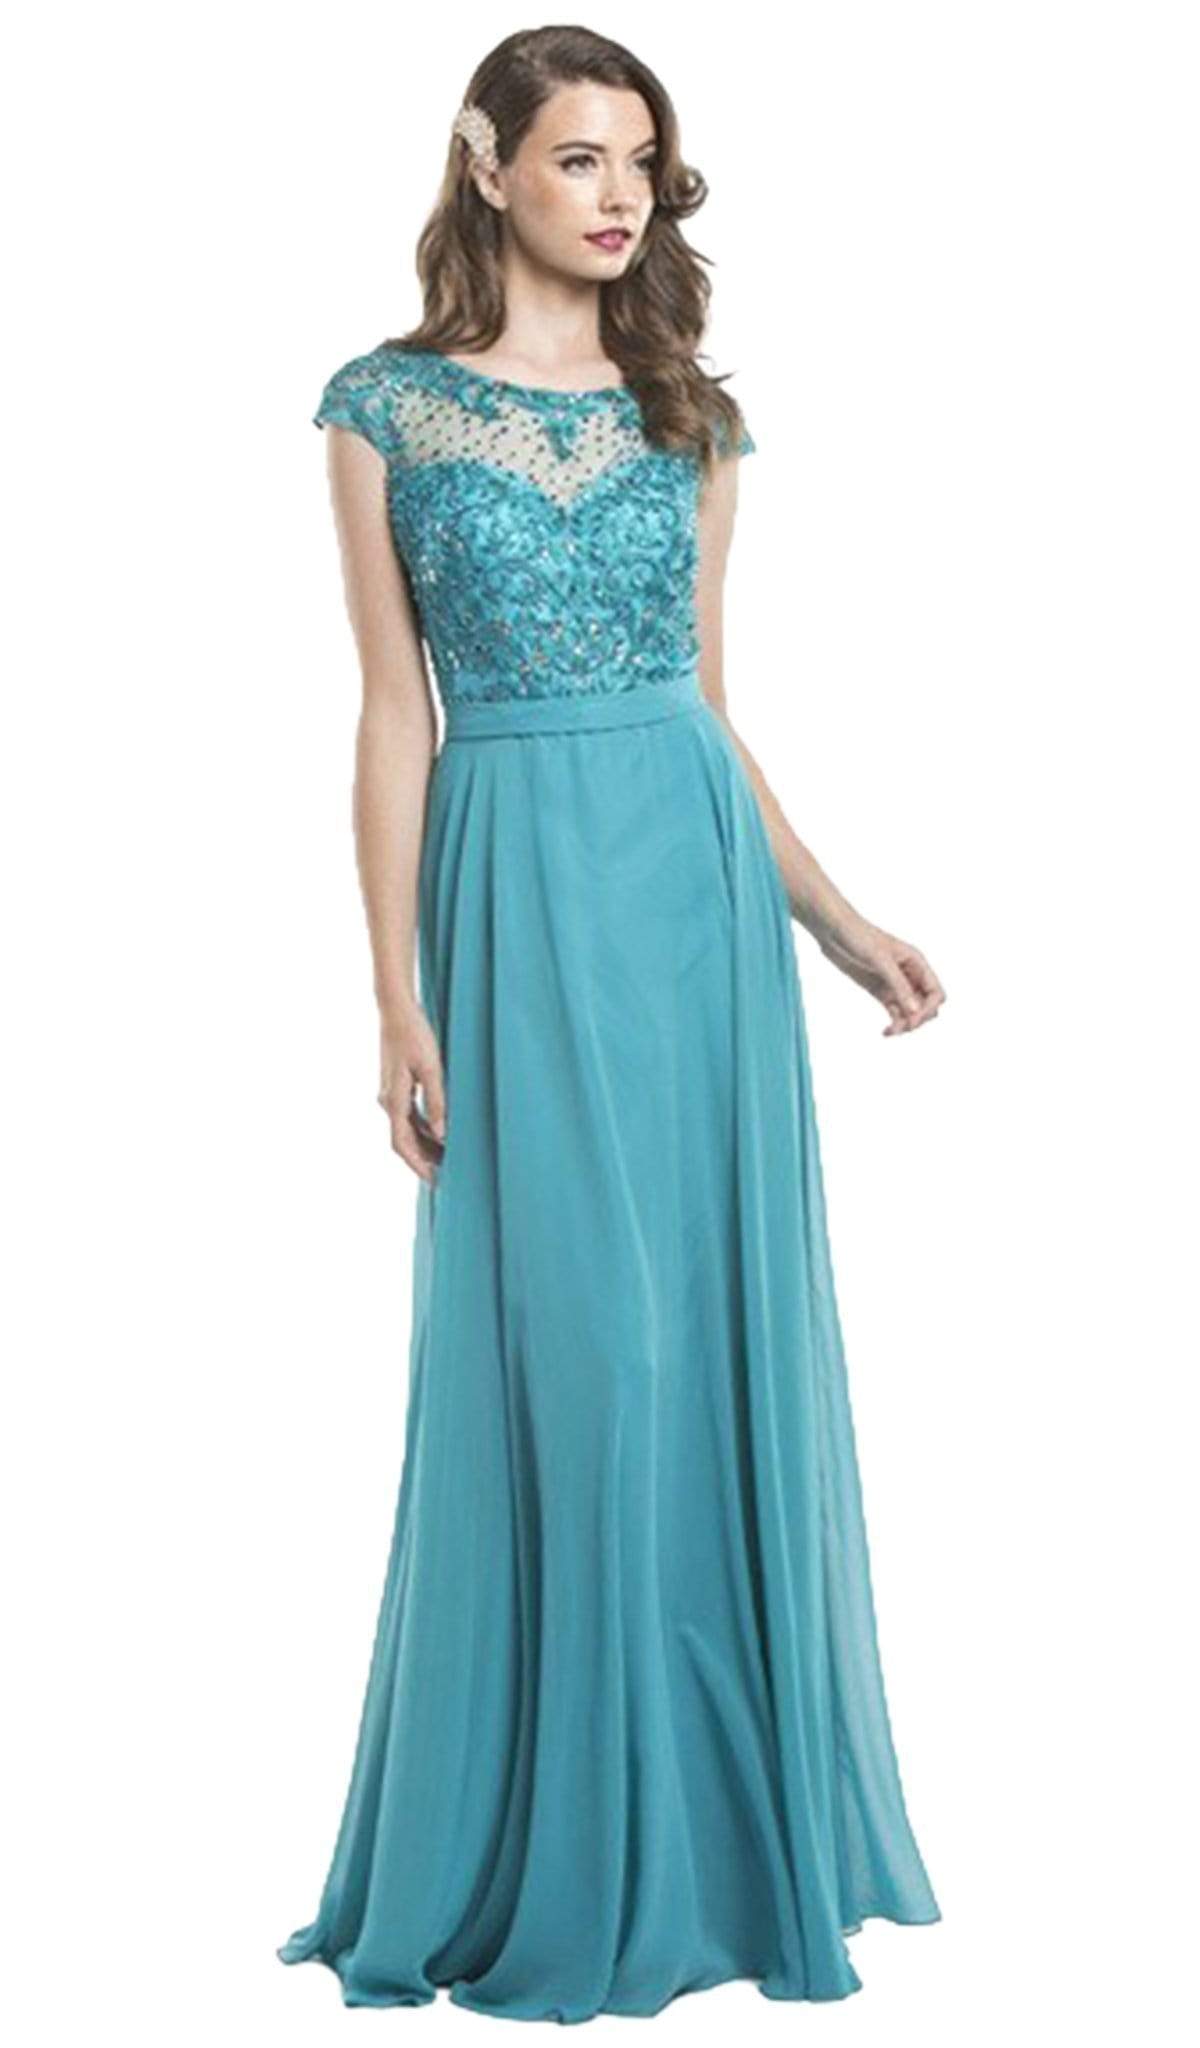 Aspeed Design - Illusion Embroidered Long Formal Teal Dress
